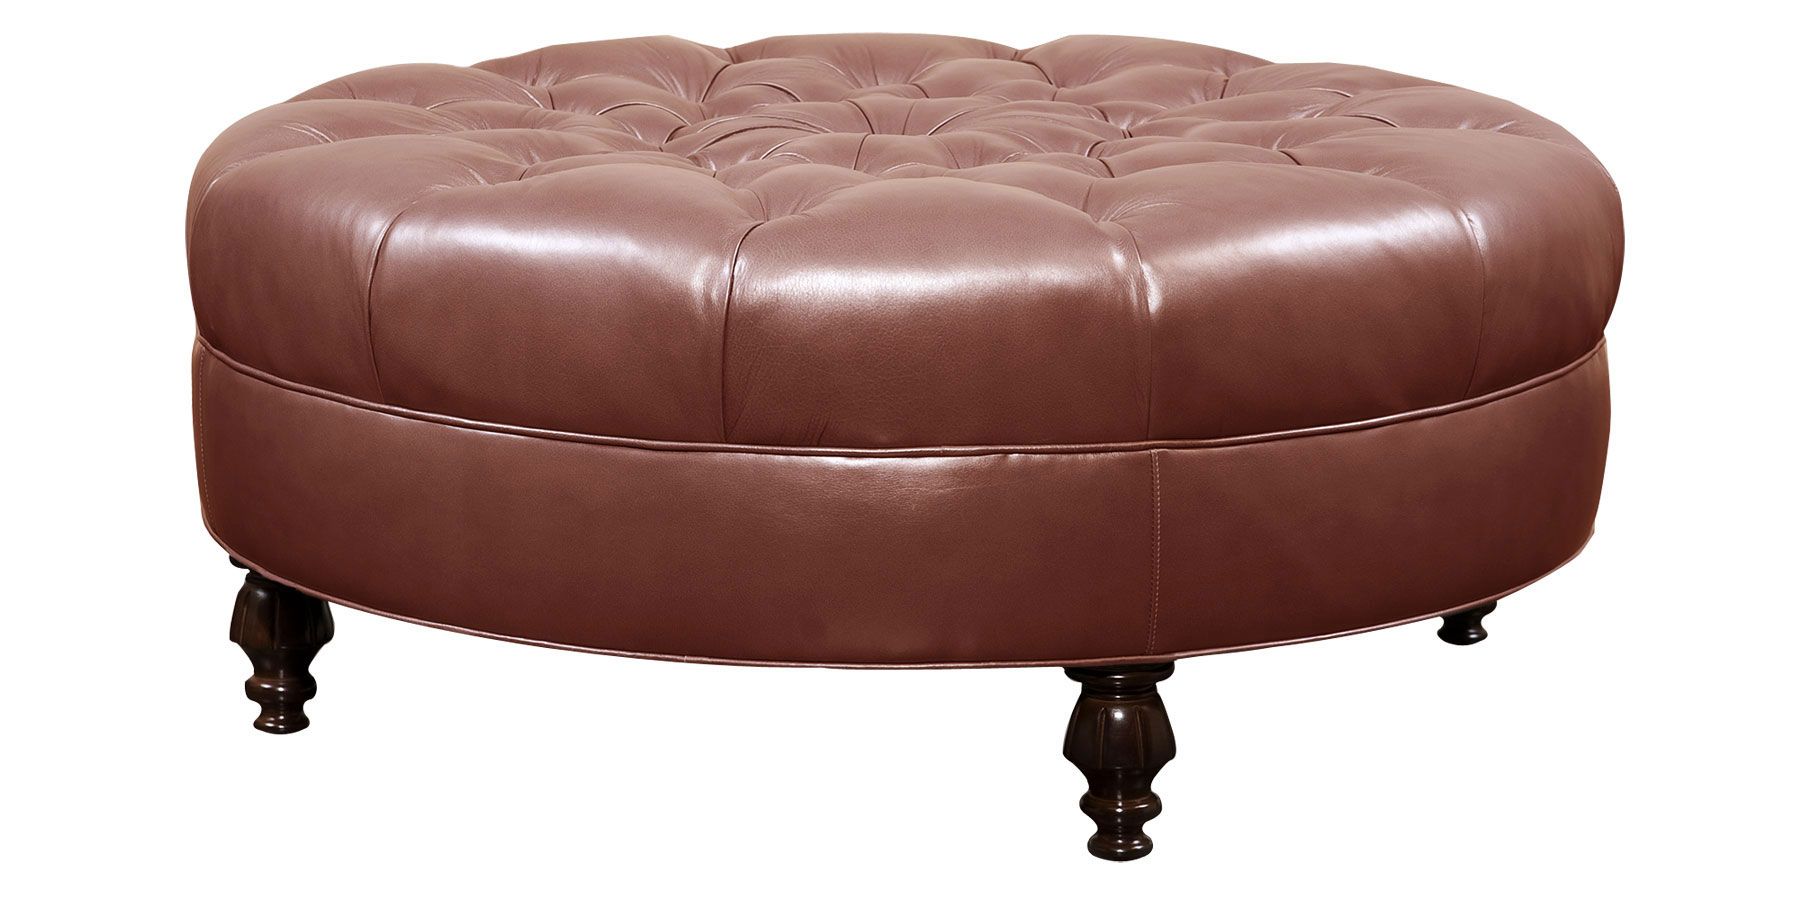 Tufted Round Ottoman Leather Upholstery | Club Furniture For Tufted Ottoman Console Tables (Photo 15 of 20)